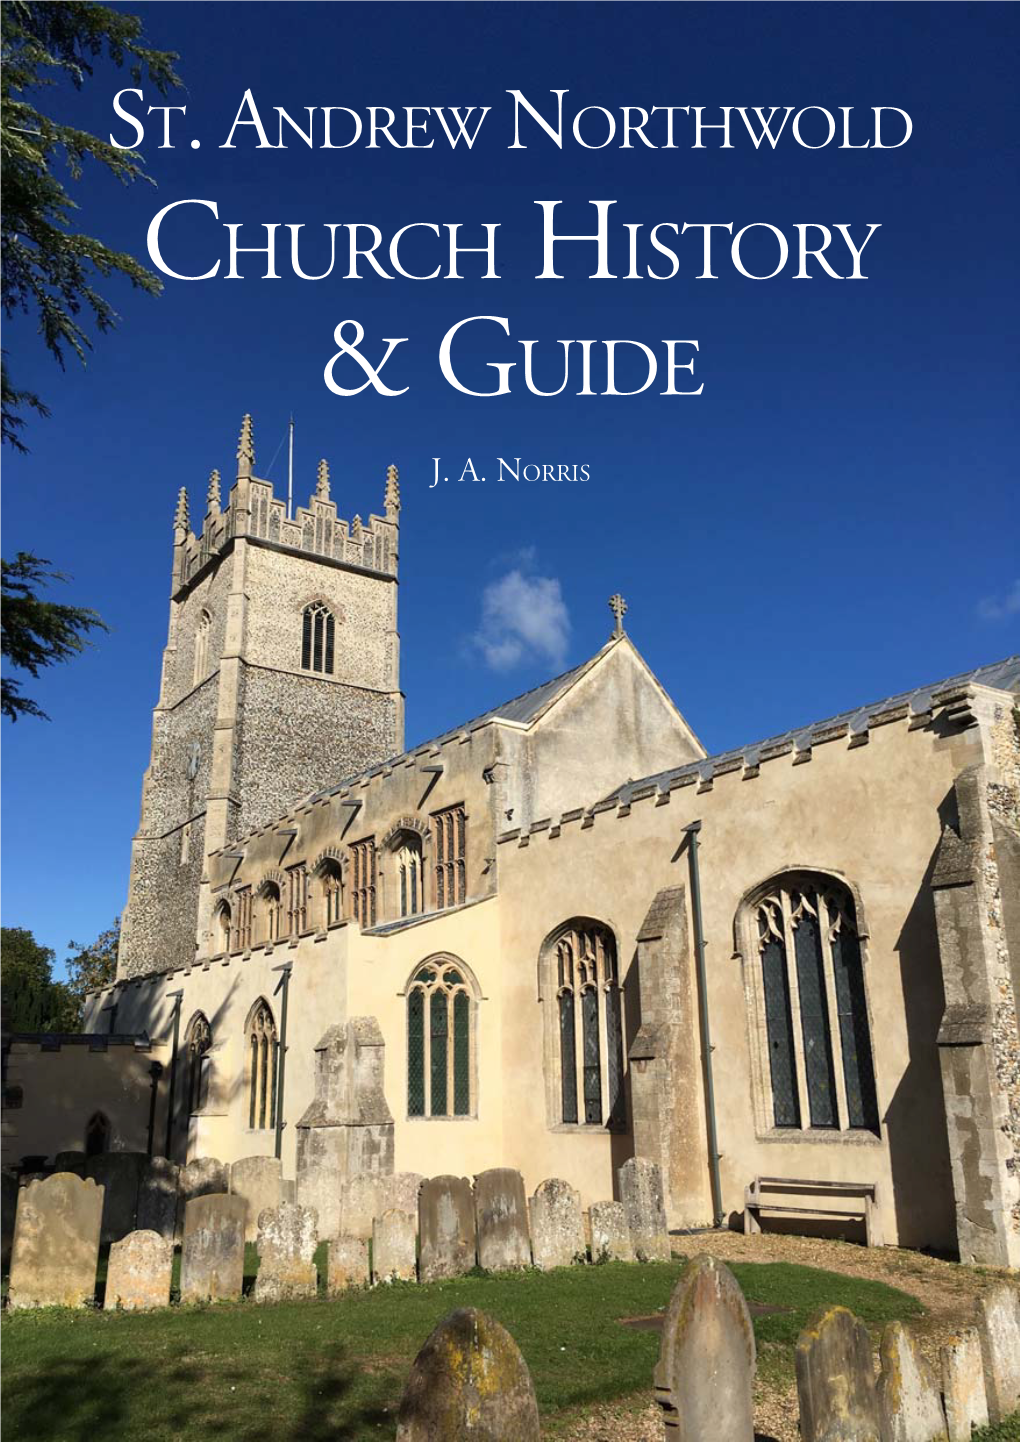 St. Andrew Northwold Church History & Guide